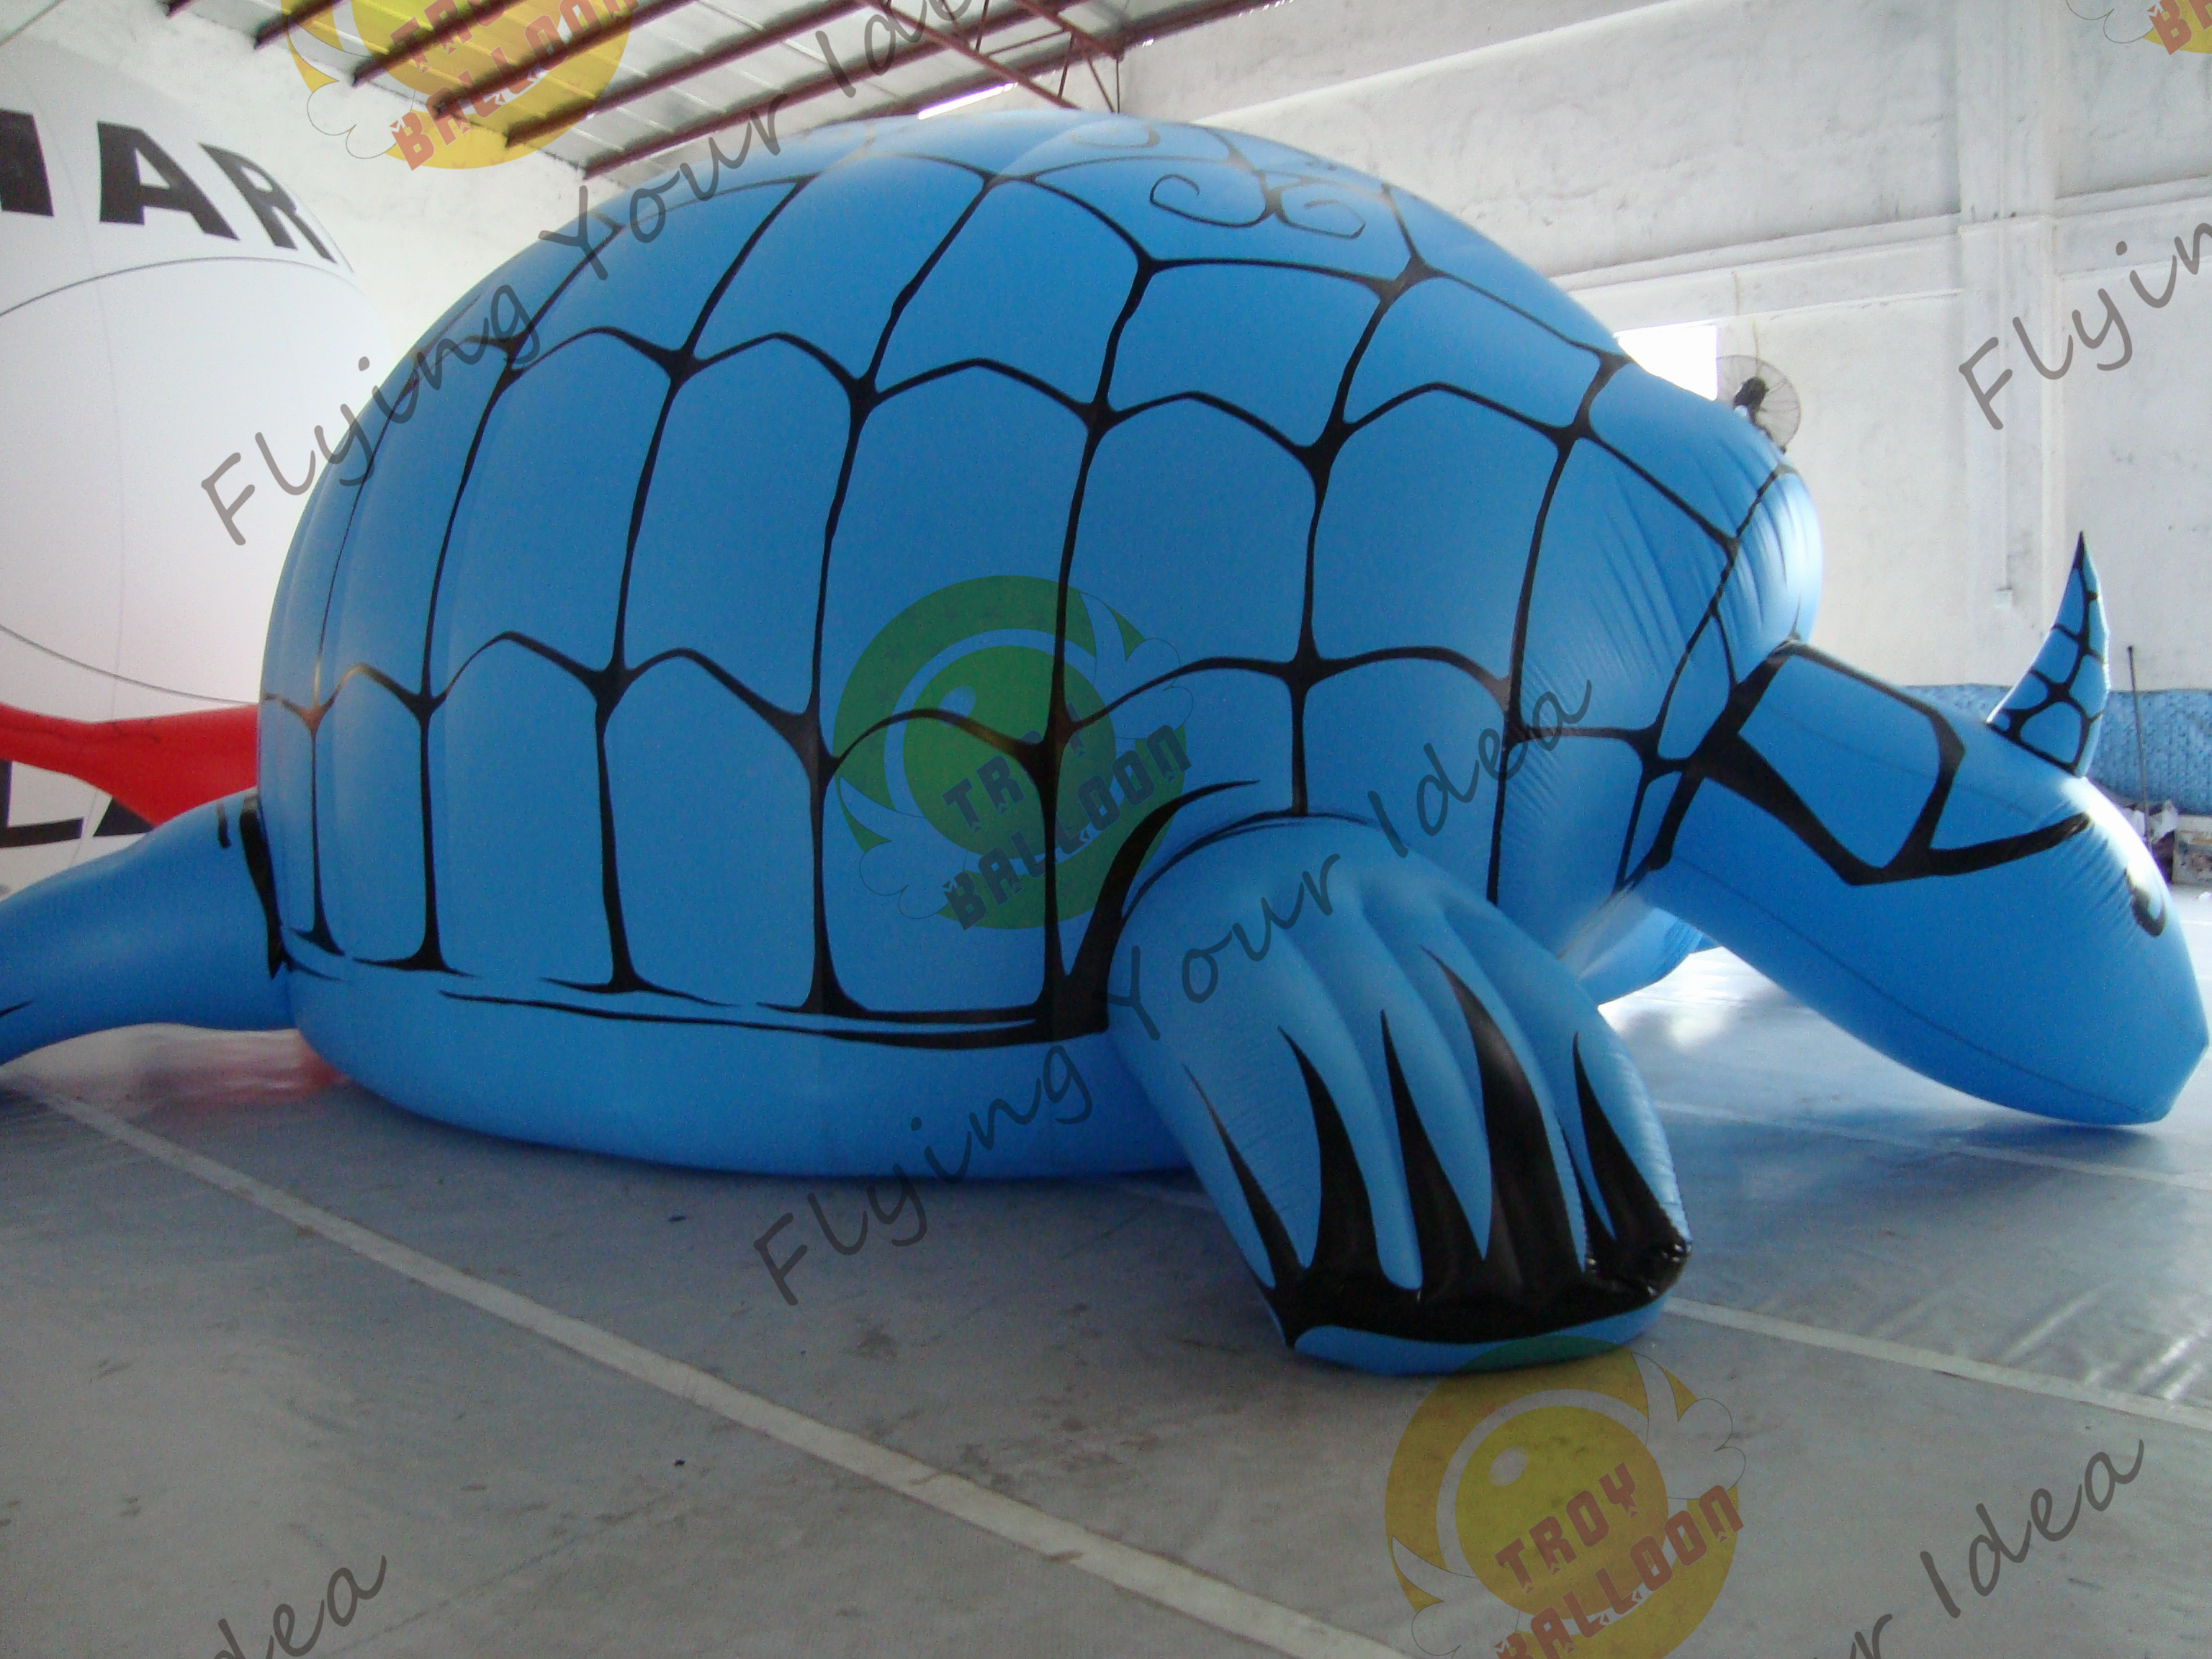 Buy cheap Funny Inflatable Pool Turtle , Amusement Park Giant Inflatable Animals from wholesalers